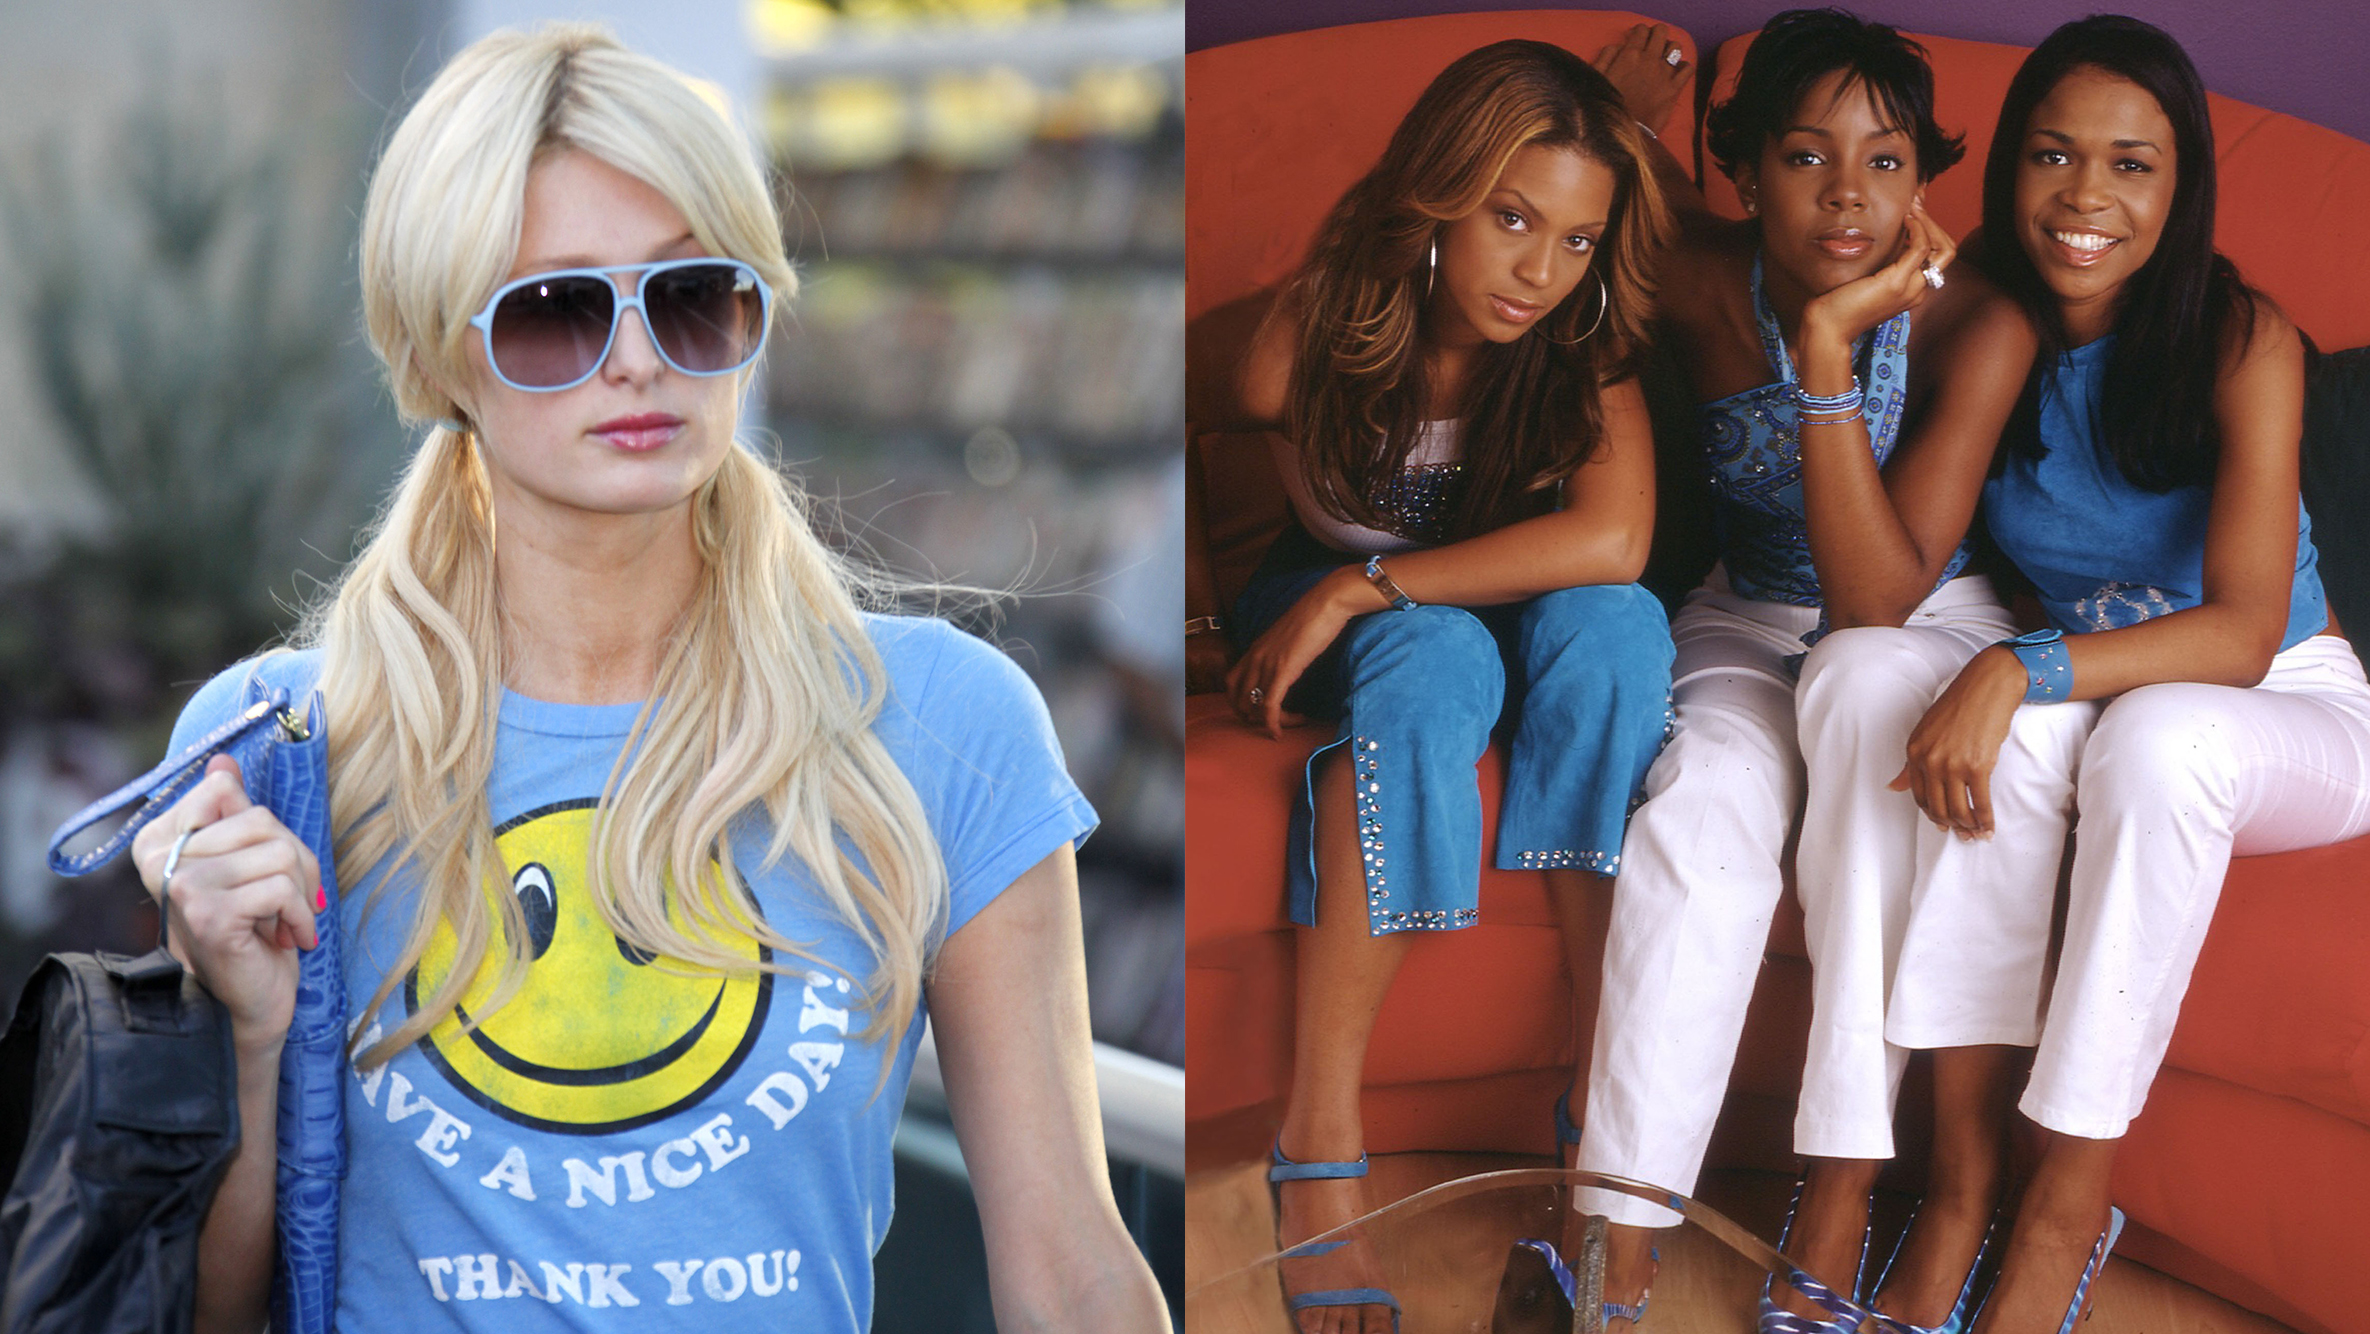 Paris Hilton throws it back to one of her most iconic 2000s looks